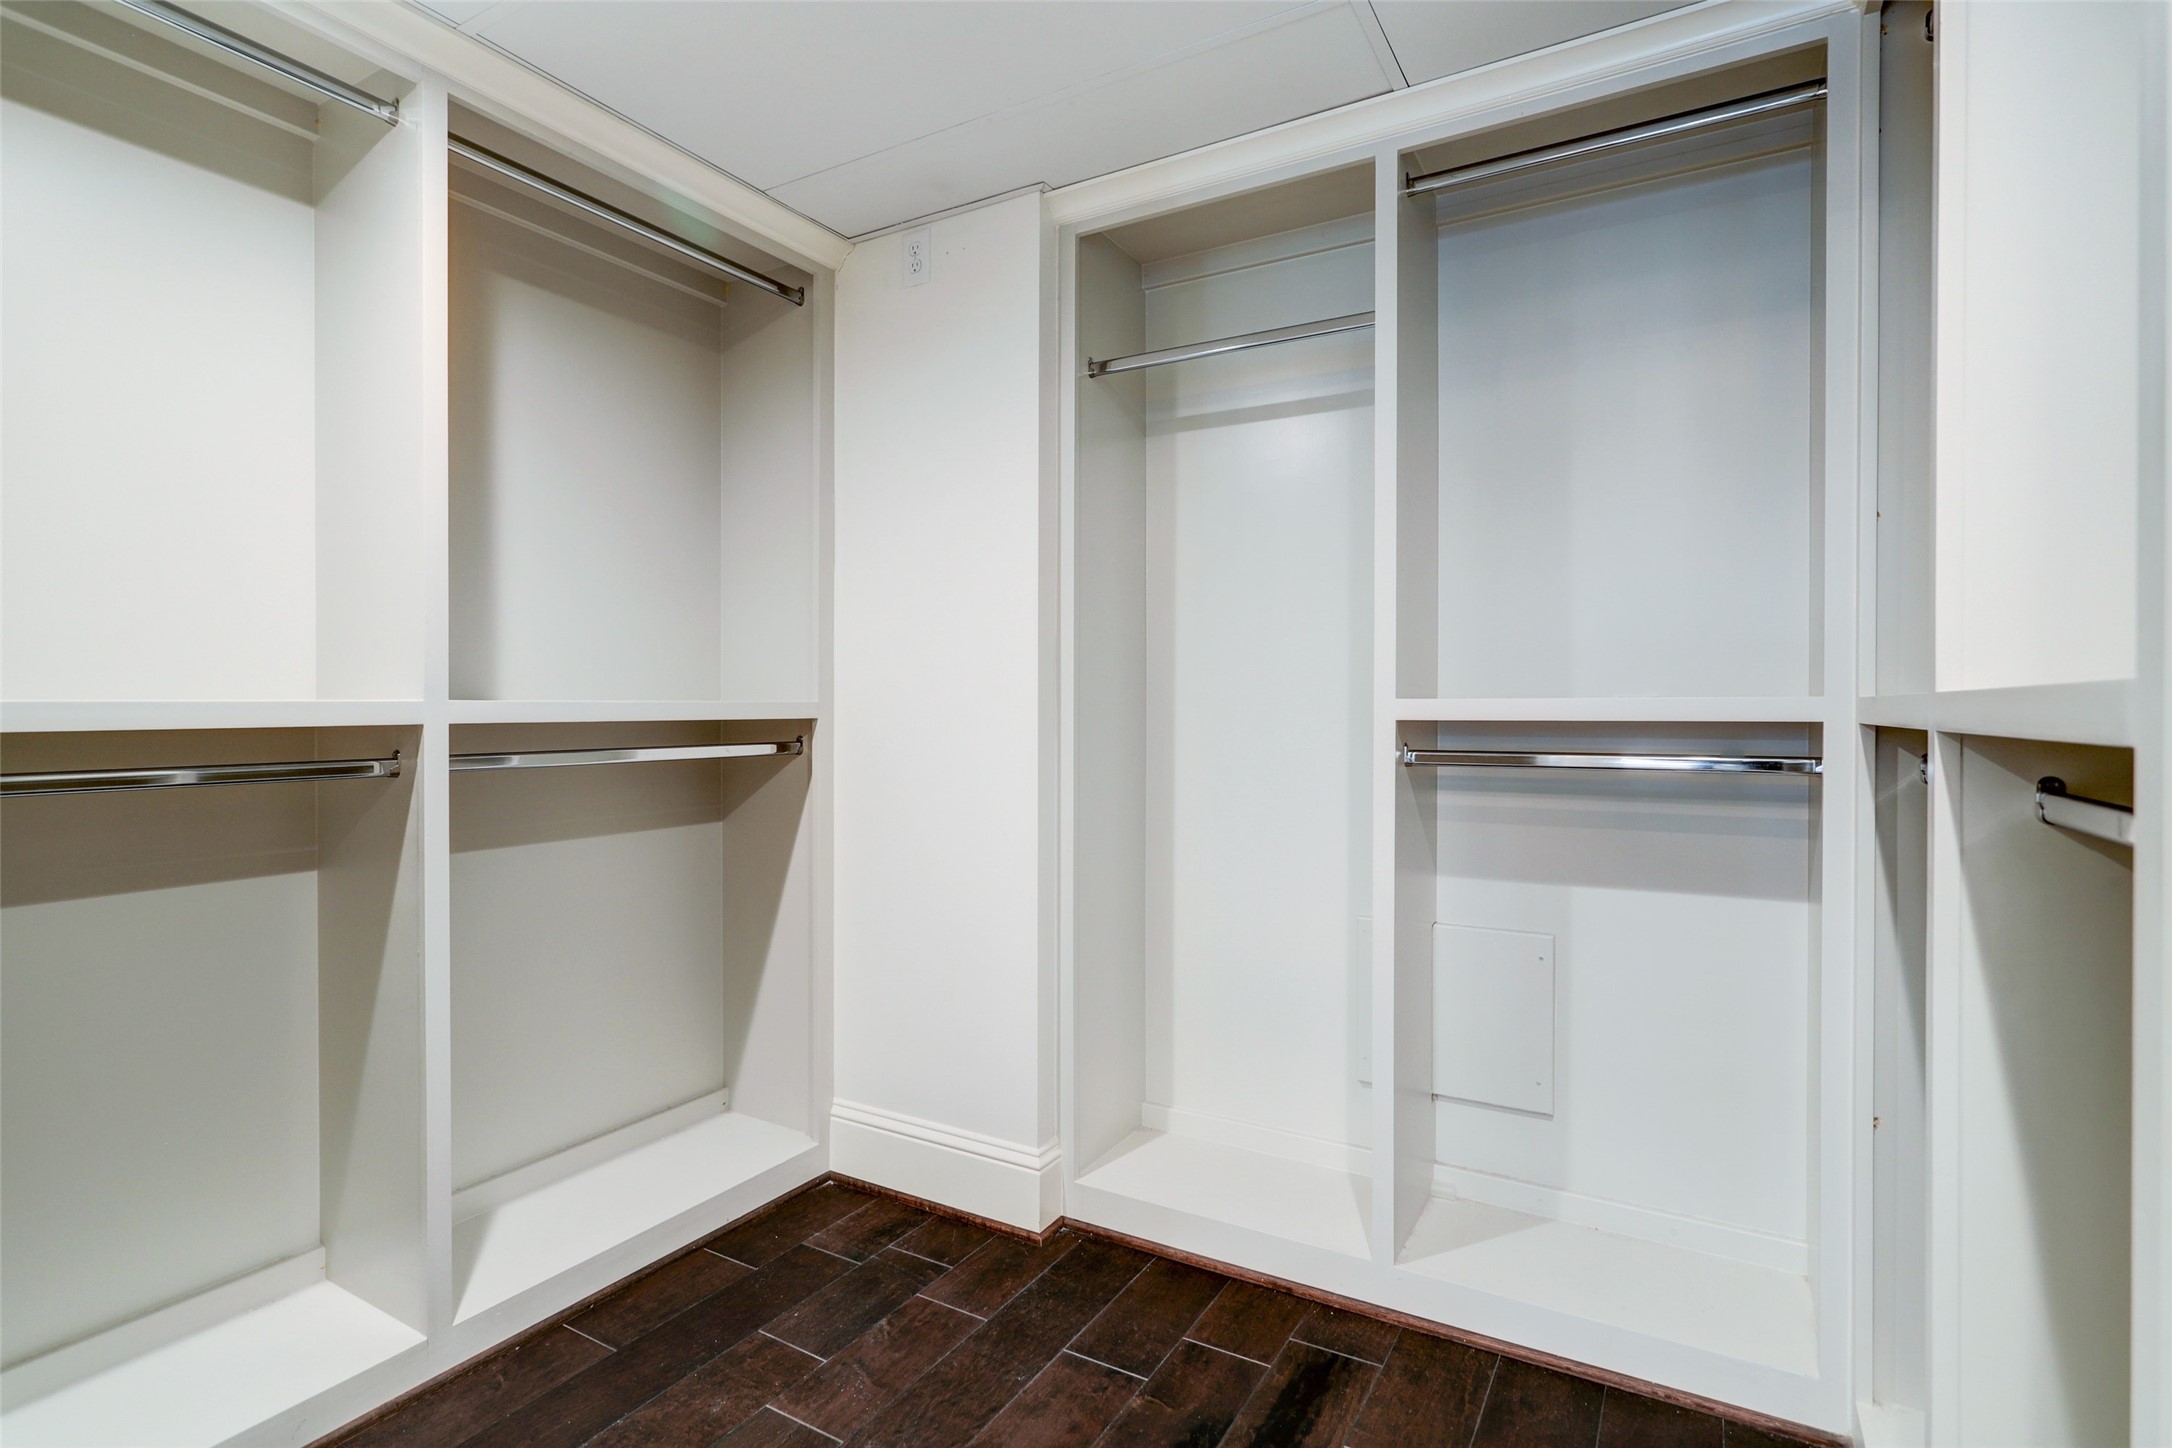 Here is the primary custom closet with plenty of hanging and built-in storage.